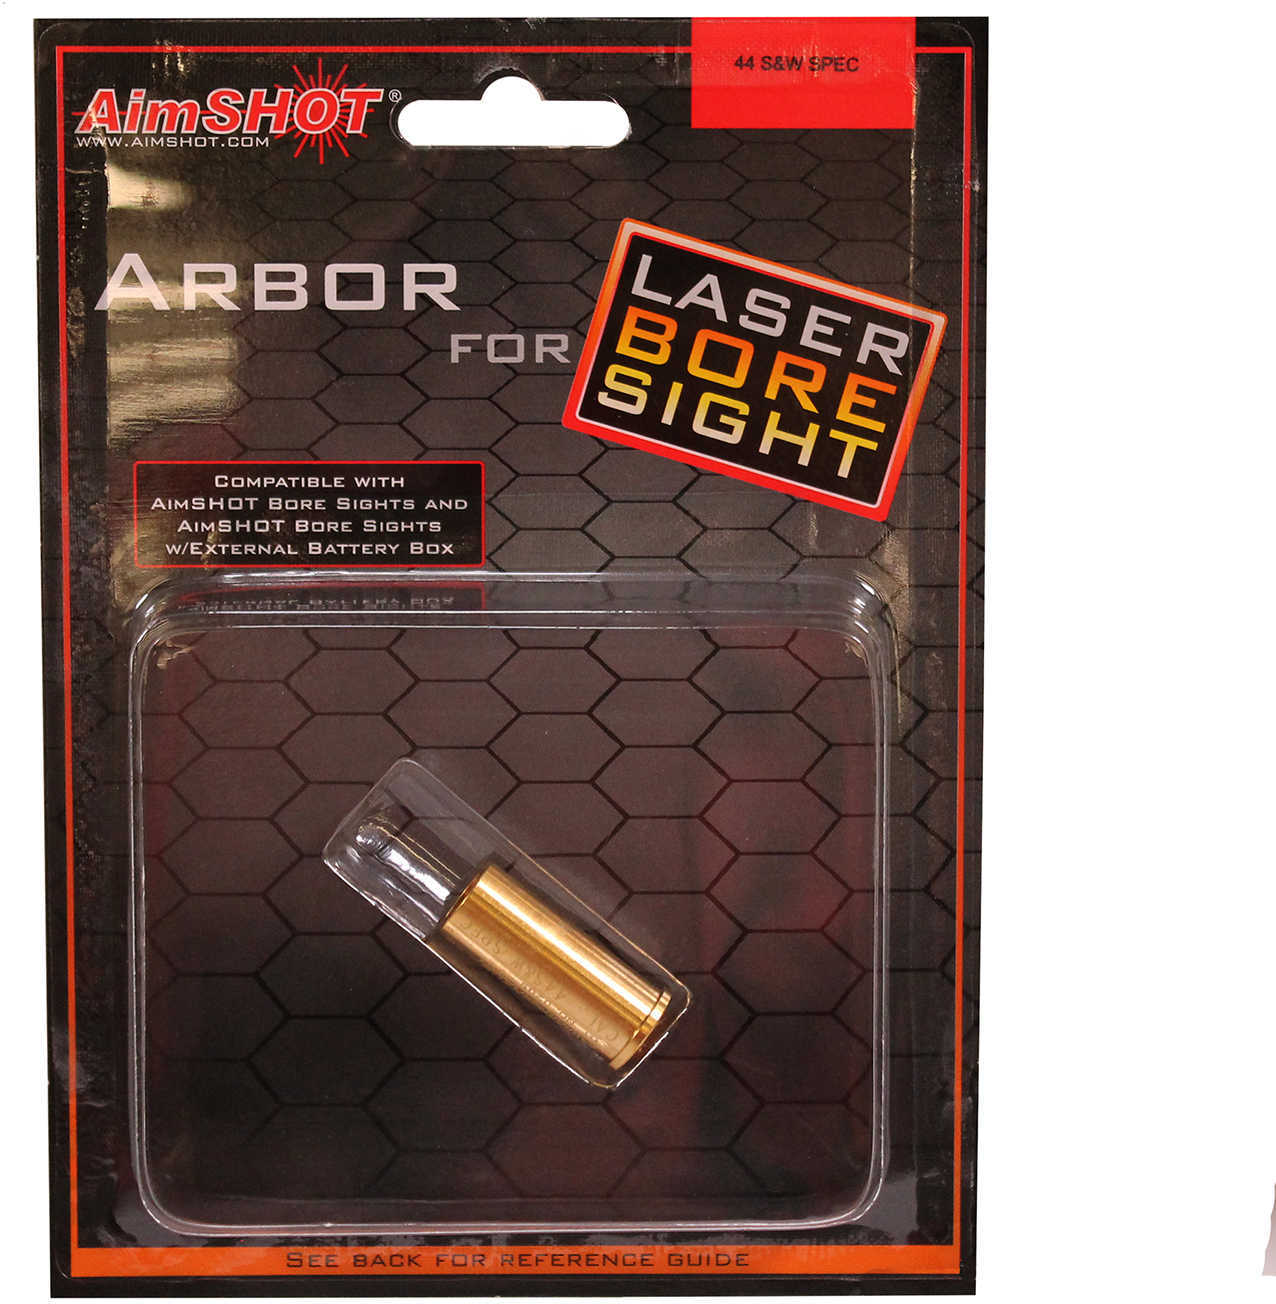 Aimshot 44 S&W Arbor Md: 44SW